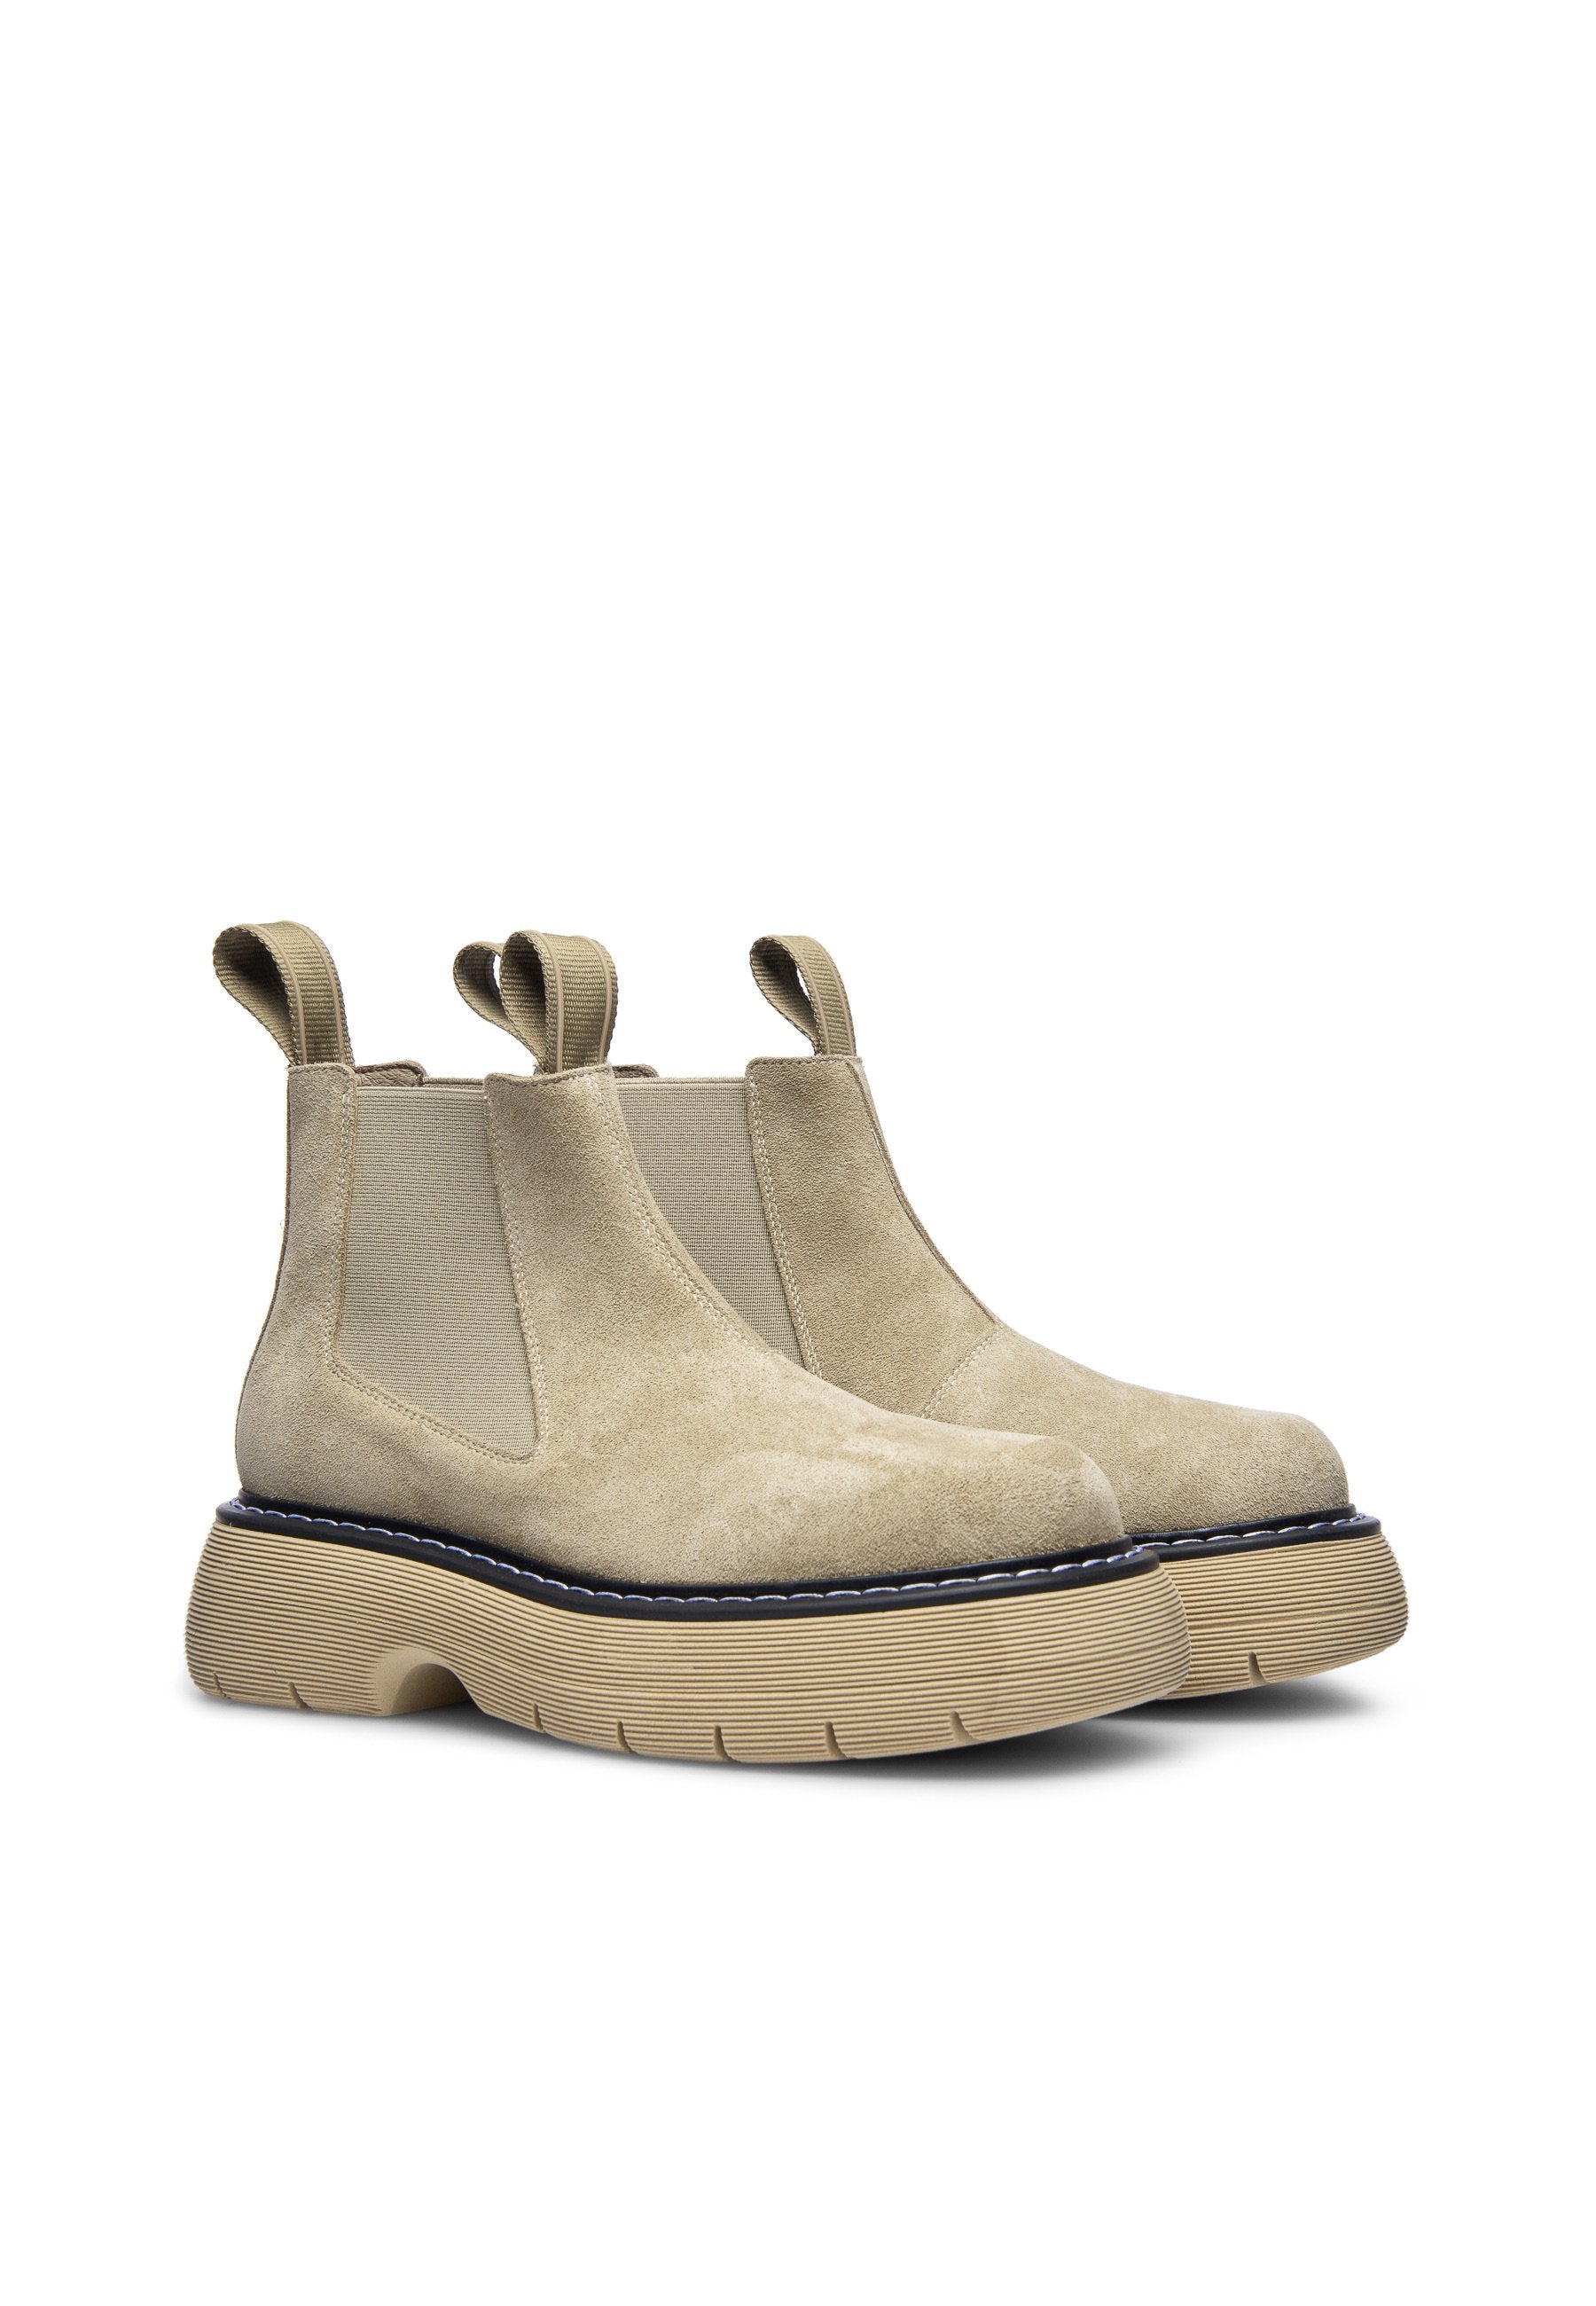 Ella Sand Suede Leather Chelsea Boots LAST1475 - 3